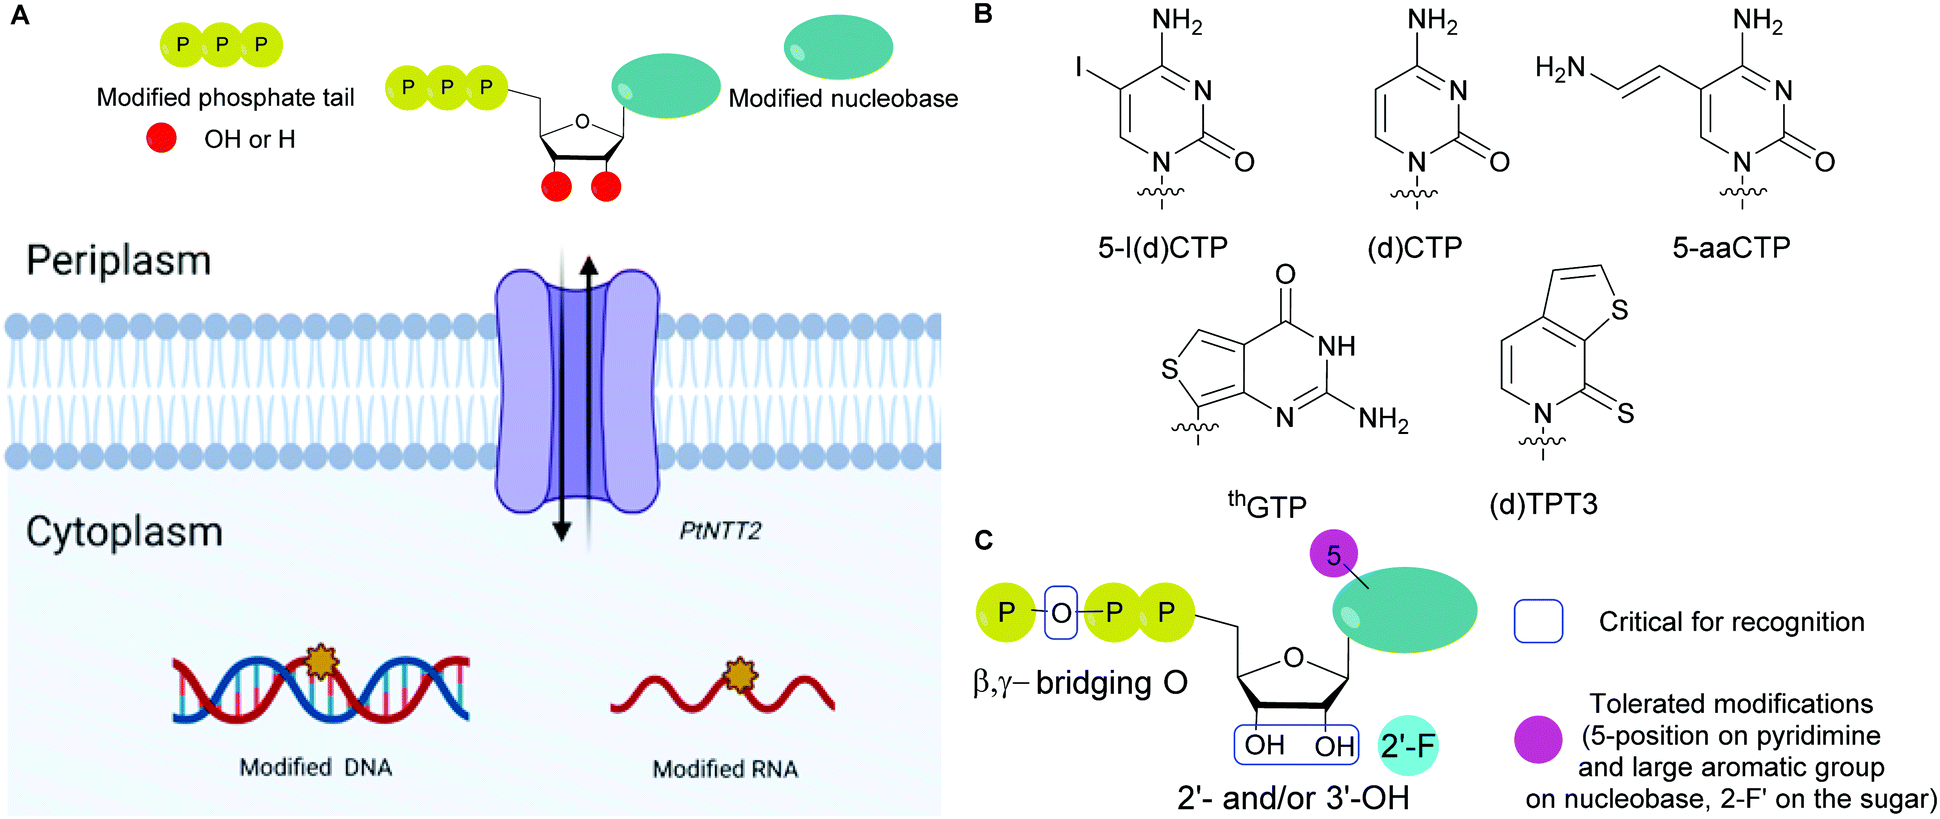 Modified Nucleoside Triphosphates In Bacterial Research For In Vitro And Live Cell Applications Rsc Chemical Biology Rsc Publishing Doi 10 1039 D0cb00078g